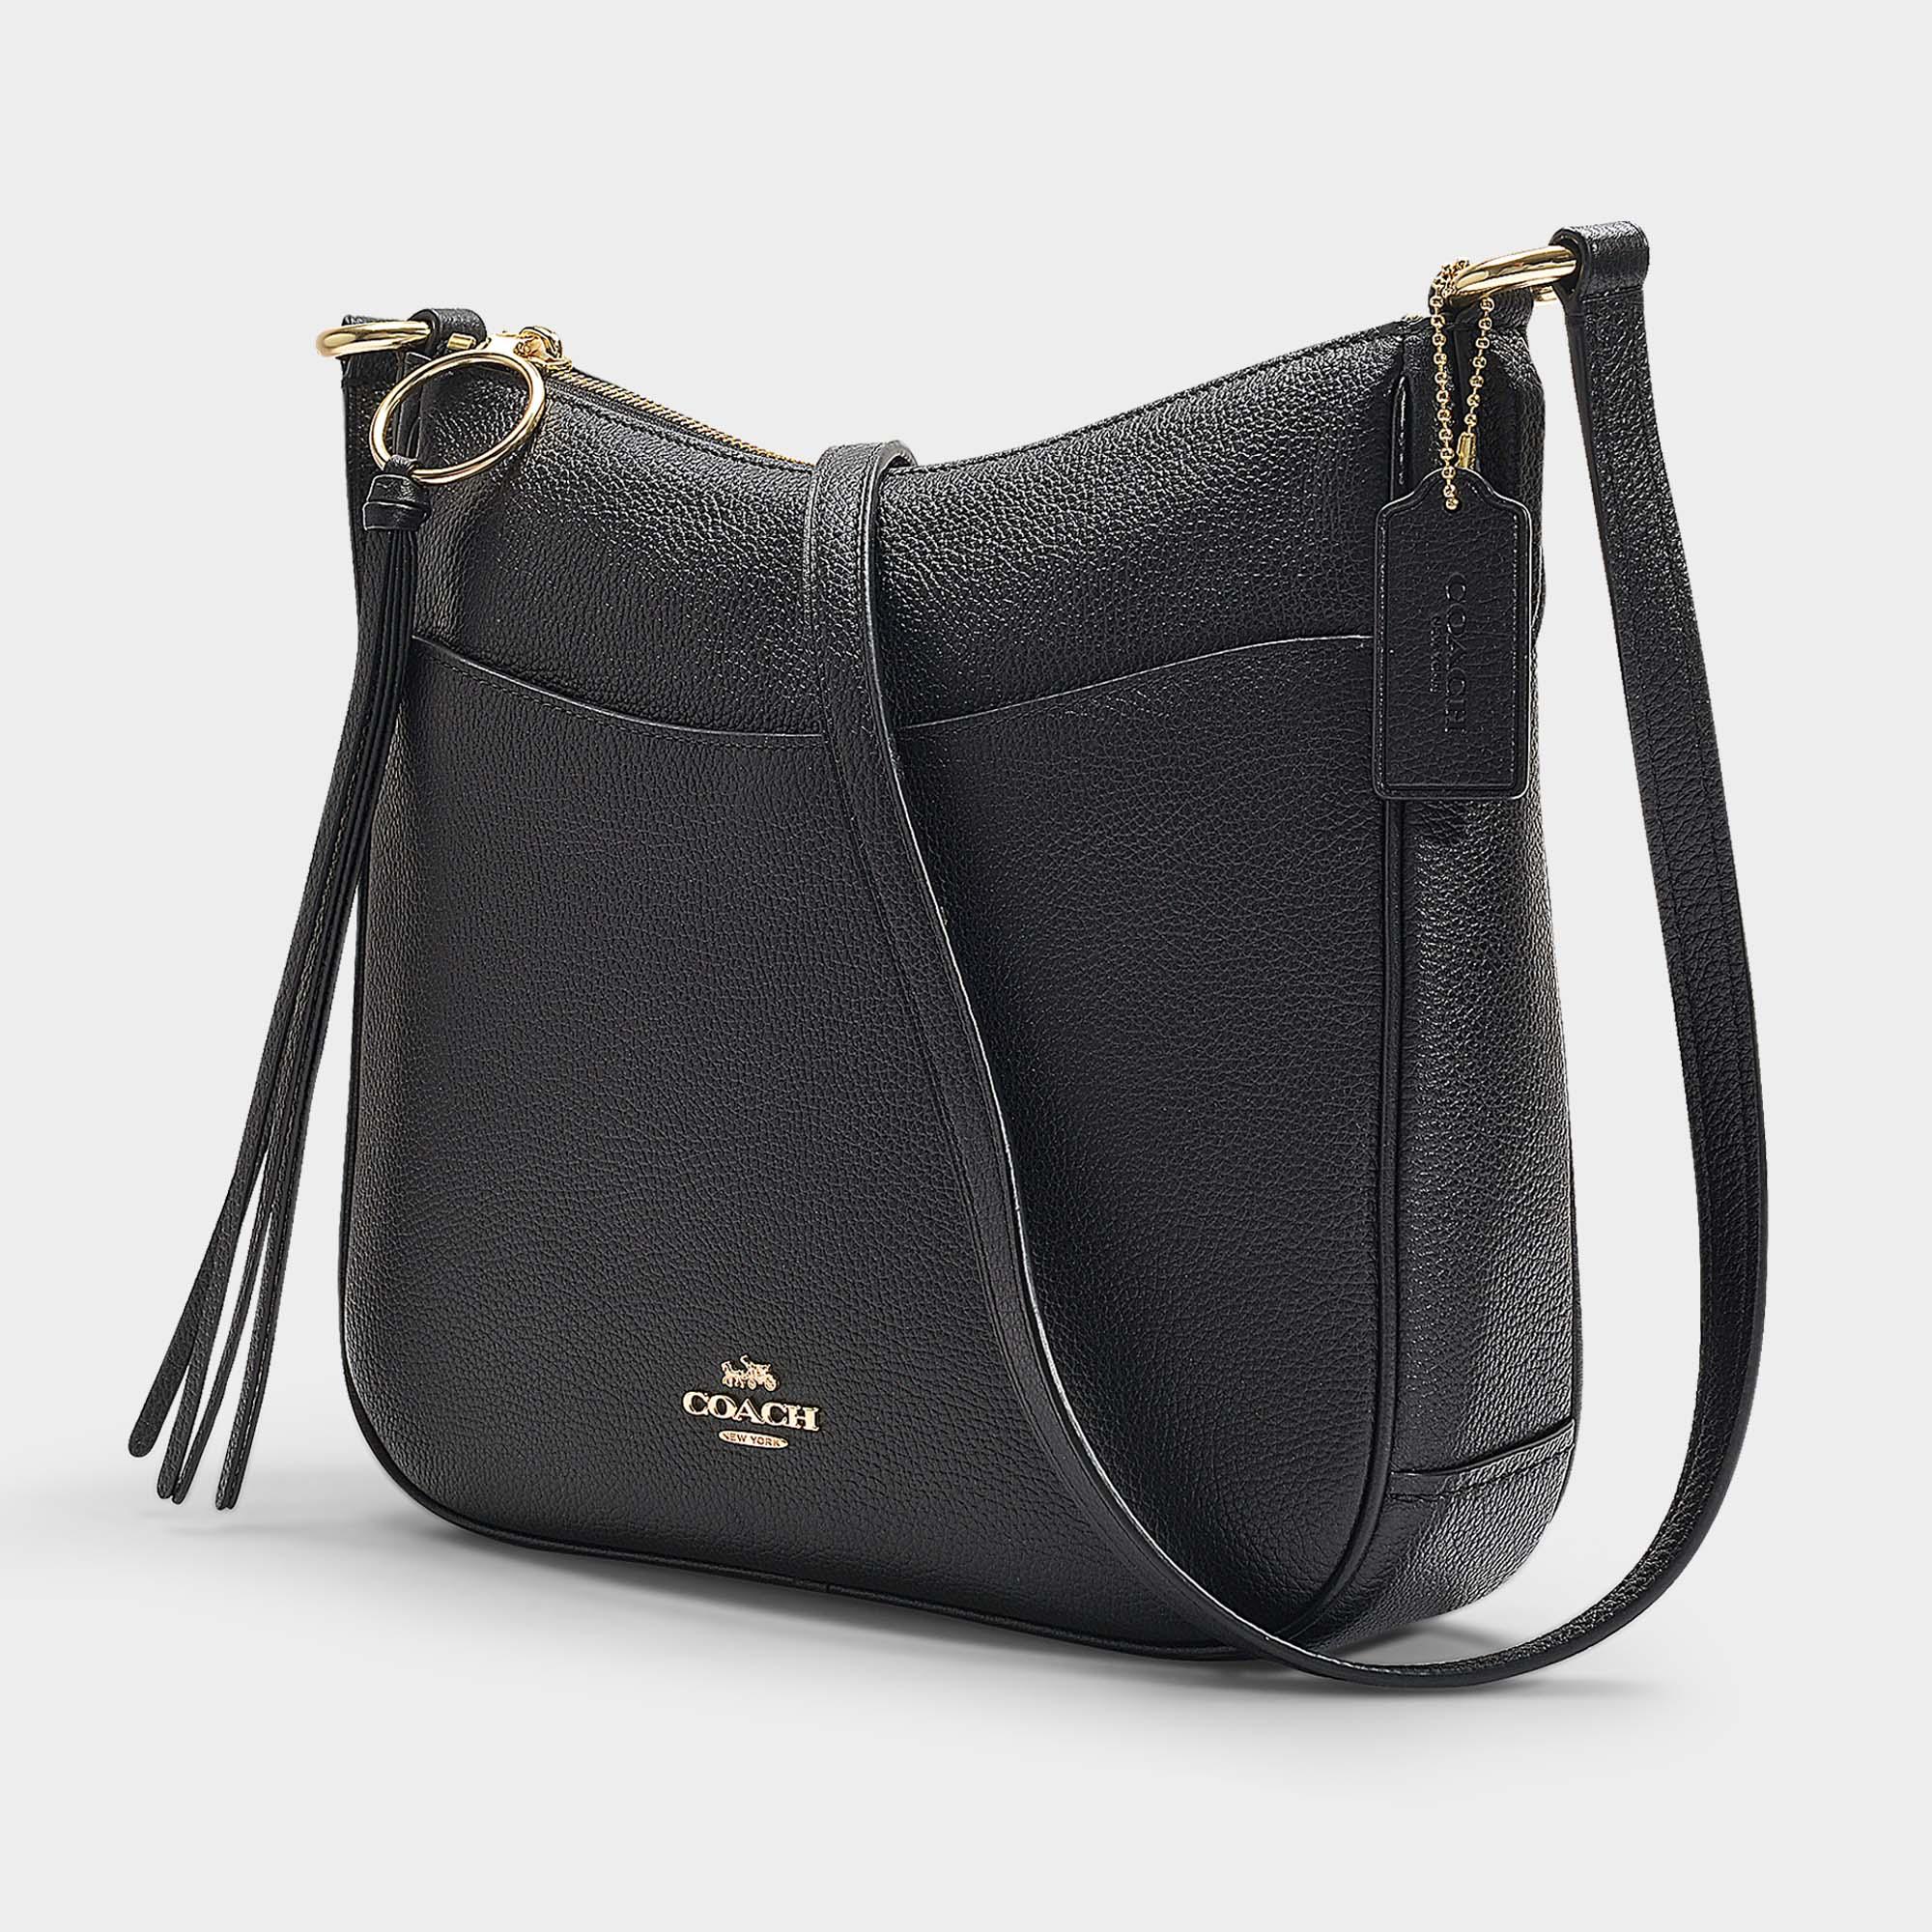 Coach Black Chaise Leather Crossbody Bag | Literacy Ontario Central South